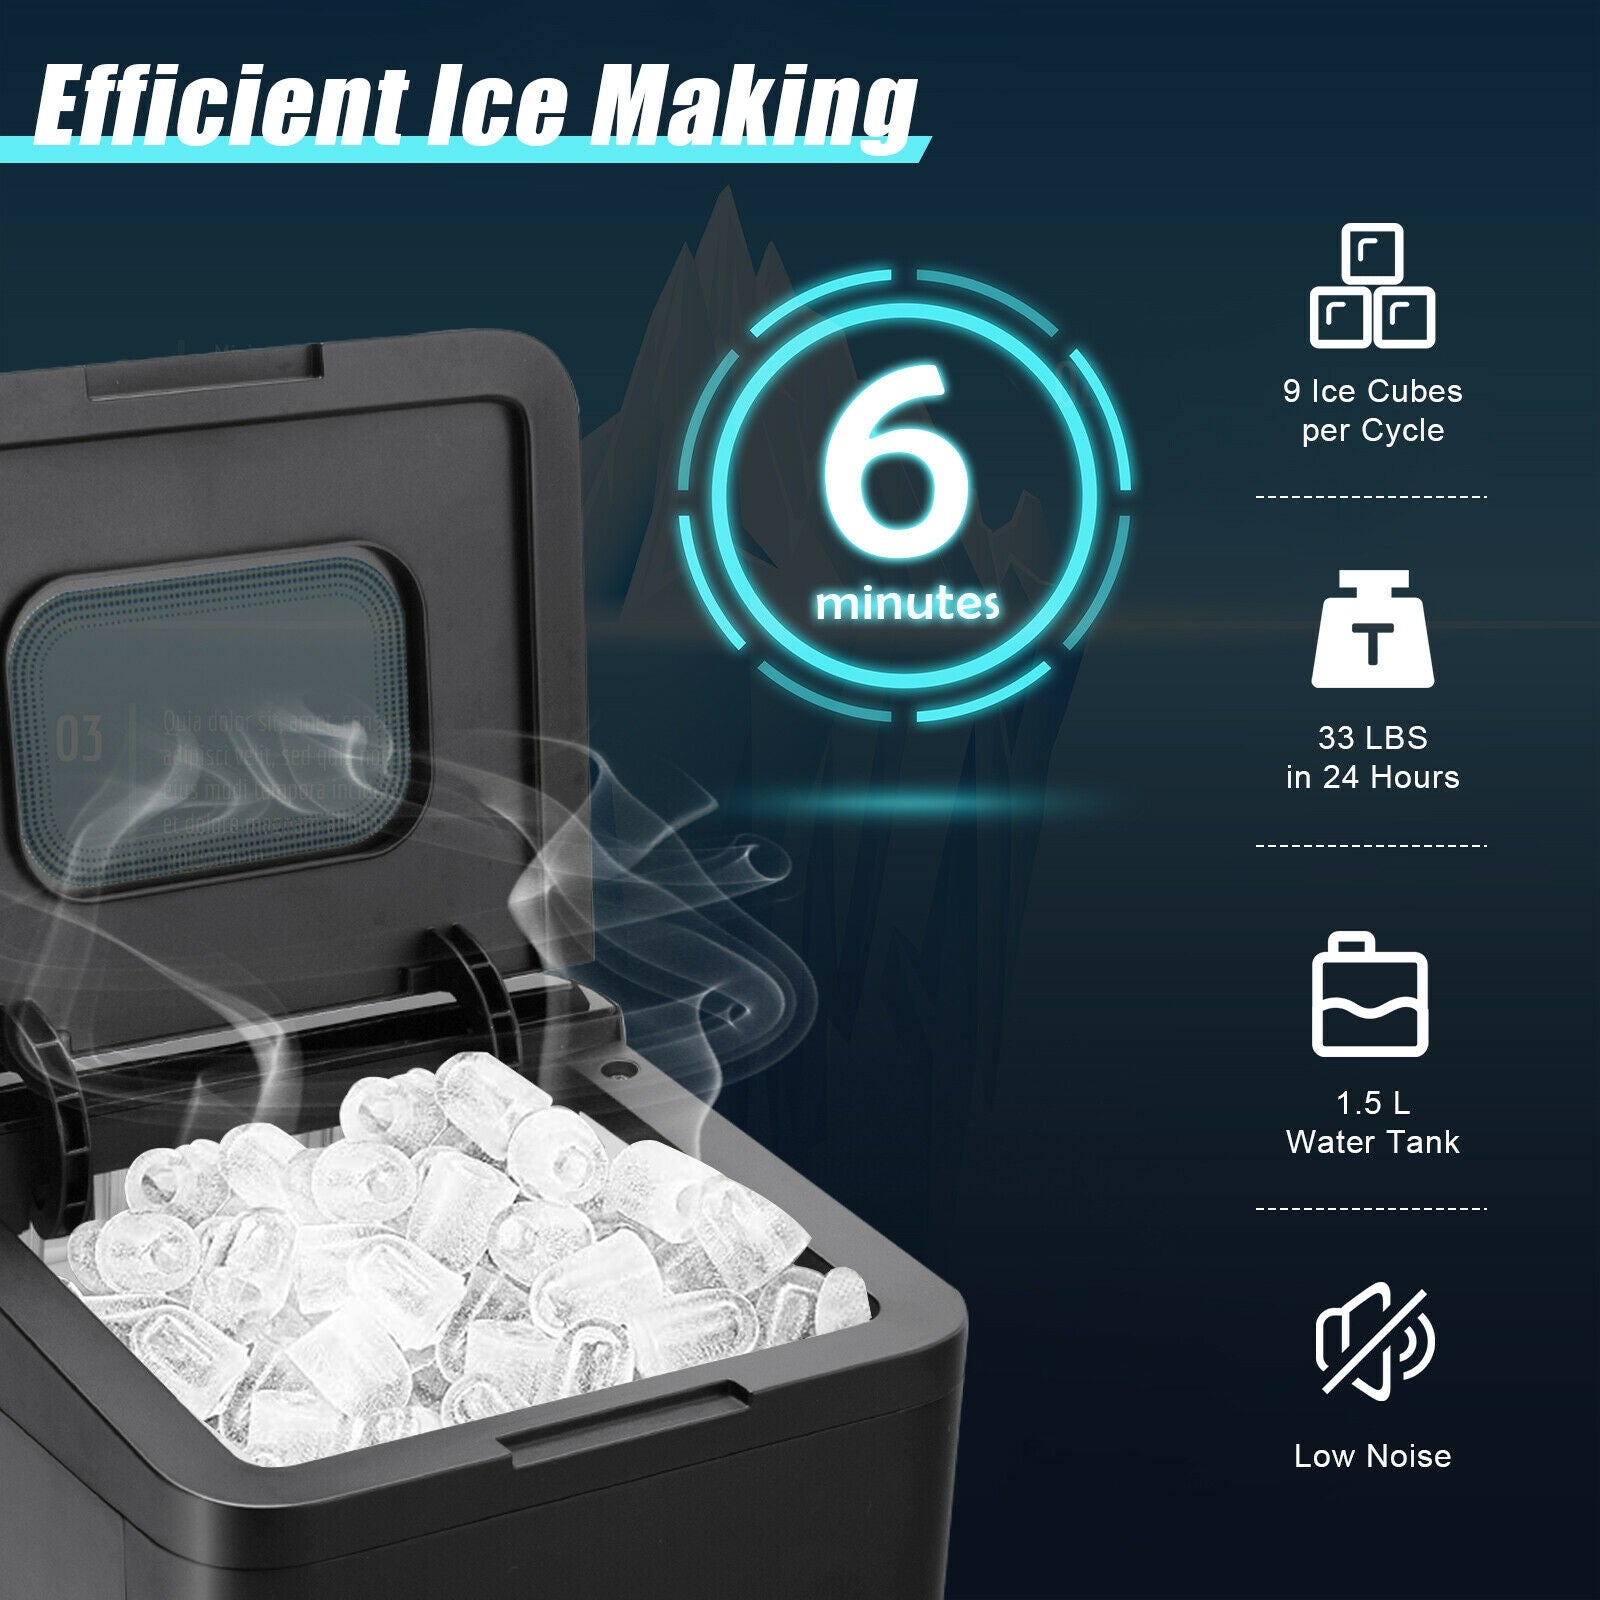 Efficient & Quiet Ice Production: With its high-quality compressor, this ice maker can produce up to 33 lbs of ice per day while operating quietly. It delivers speedy ice-making cycles, crafting 9 fresh ice cubes every 6-13 minutes. A see-through glass lid offers a clear view of the ice-making process.